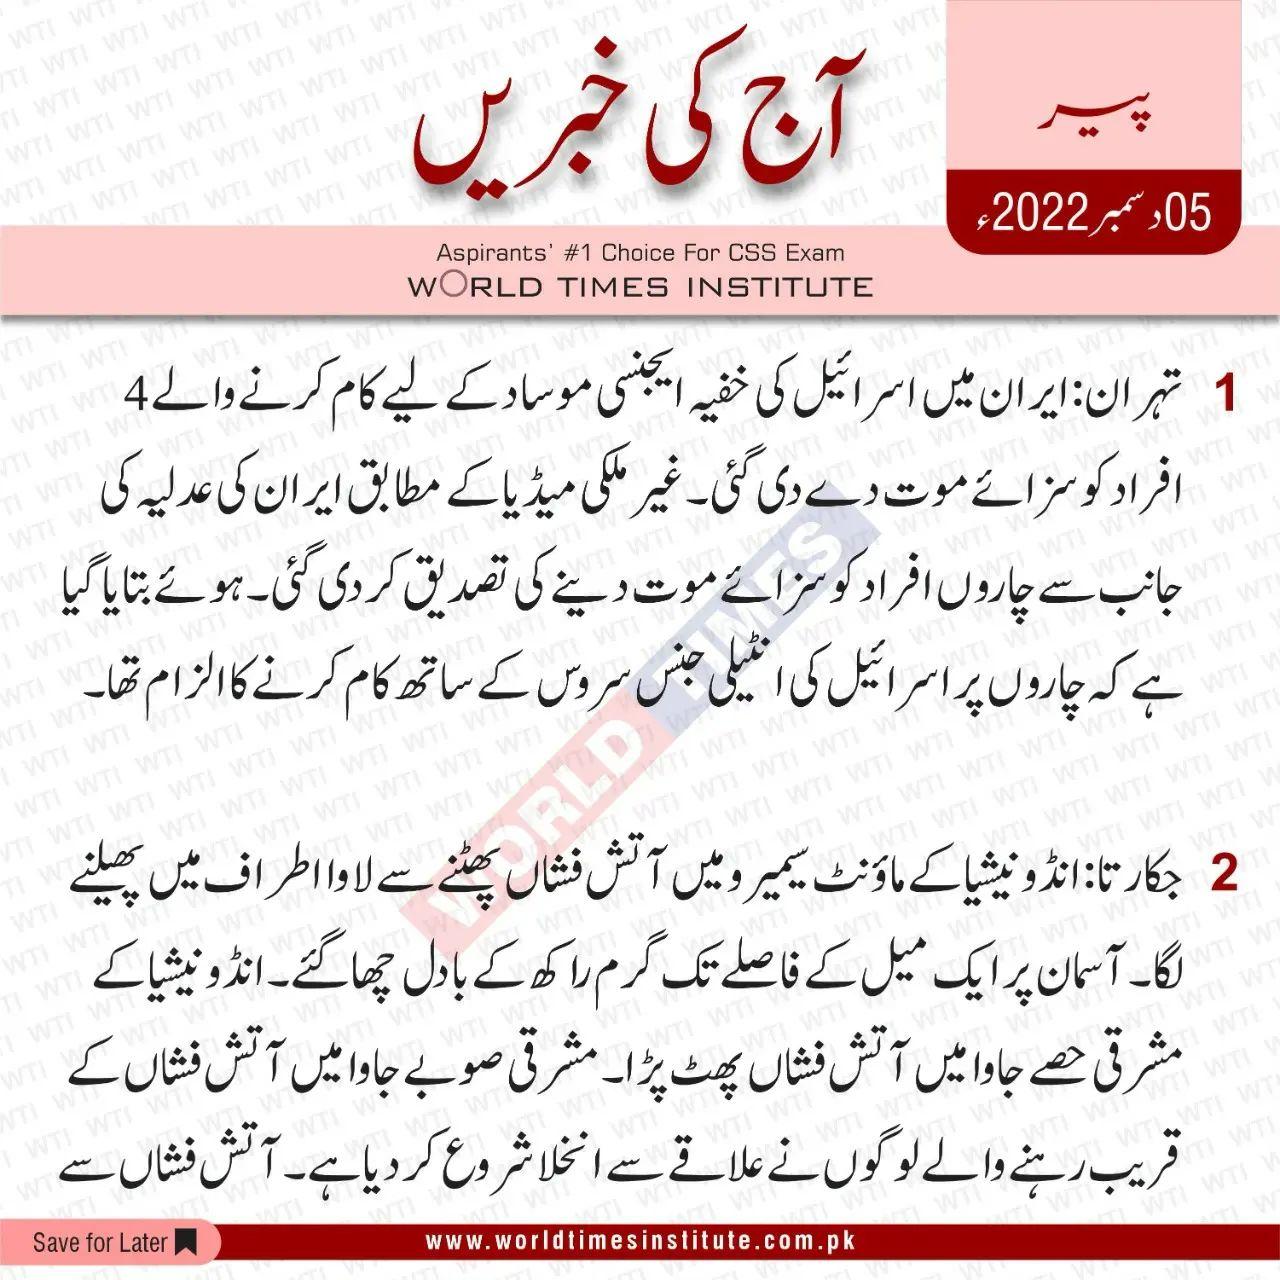 You are currently viewing Urdu News. 05-12-2022